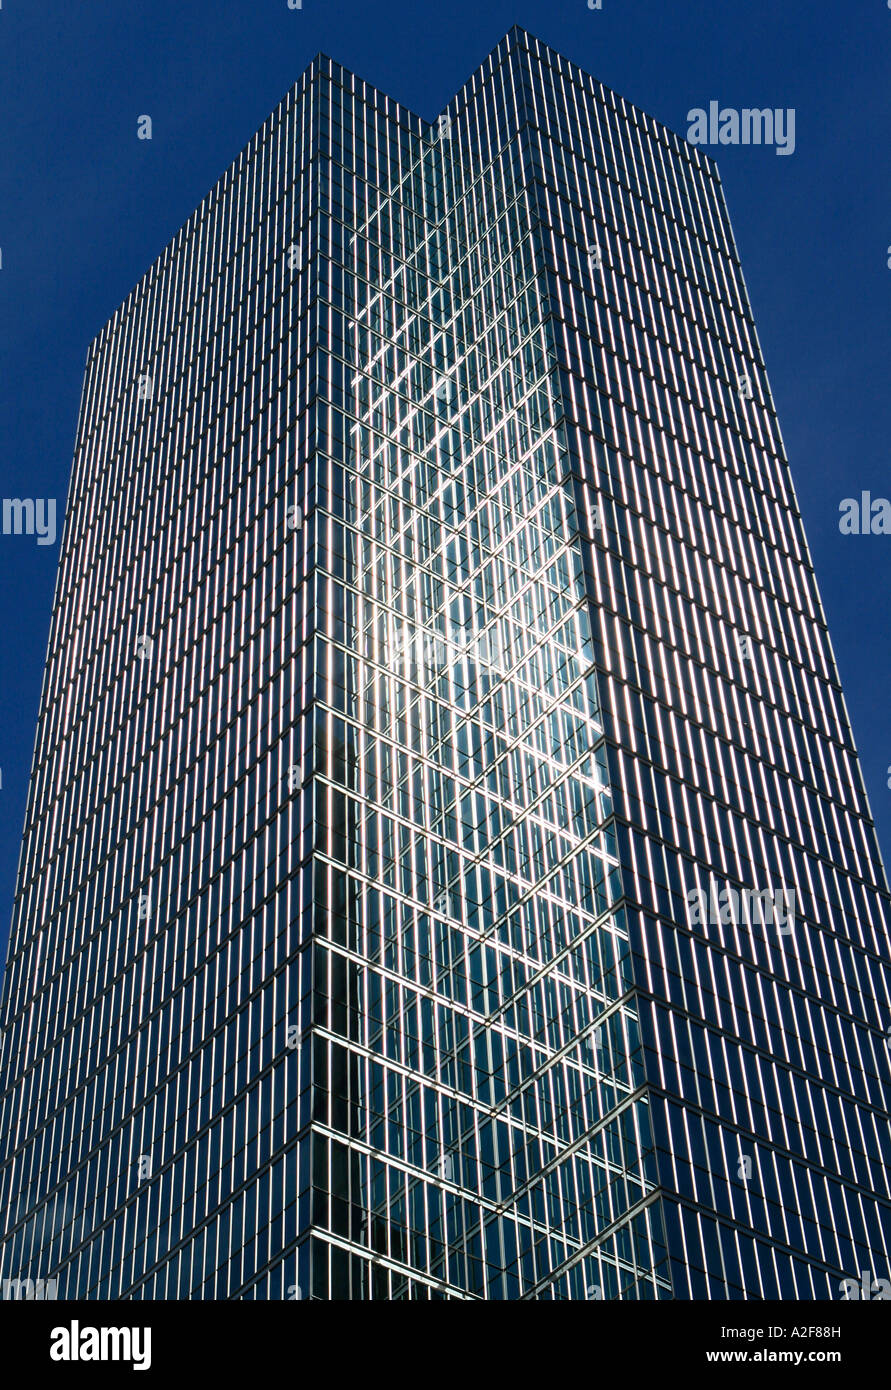 These windows on a blue sky are downtown toronto with some reflections Stock Photo